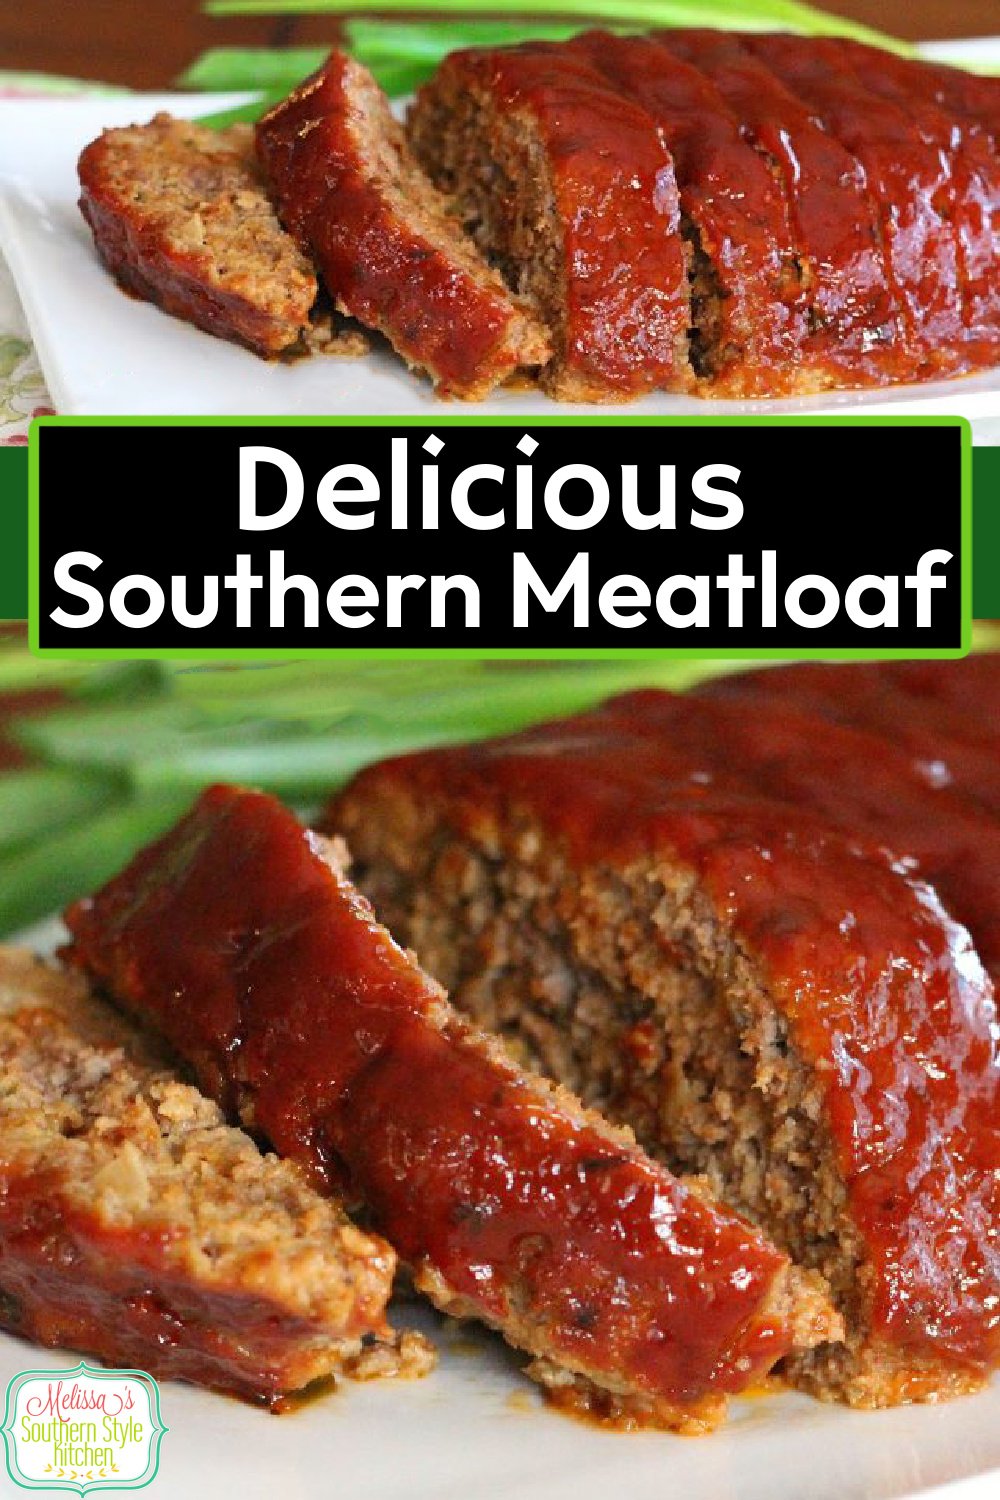 This Homestyle Delicious Meatloaf is good for the soul food #meatloaf #comfortfood #beef #easygroundbeefrecipes #deliciousmeatloaf #dinnerideas #dinner #southernfood #southernrecipes #melissassouthernstylekitchen #dinner #food #recipes via @melissasssk